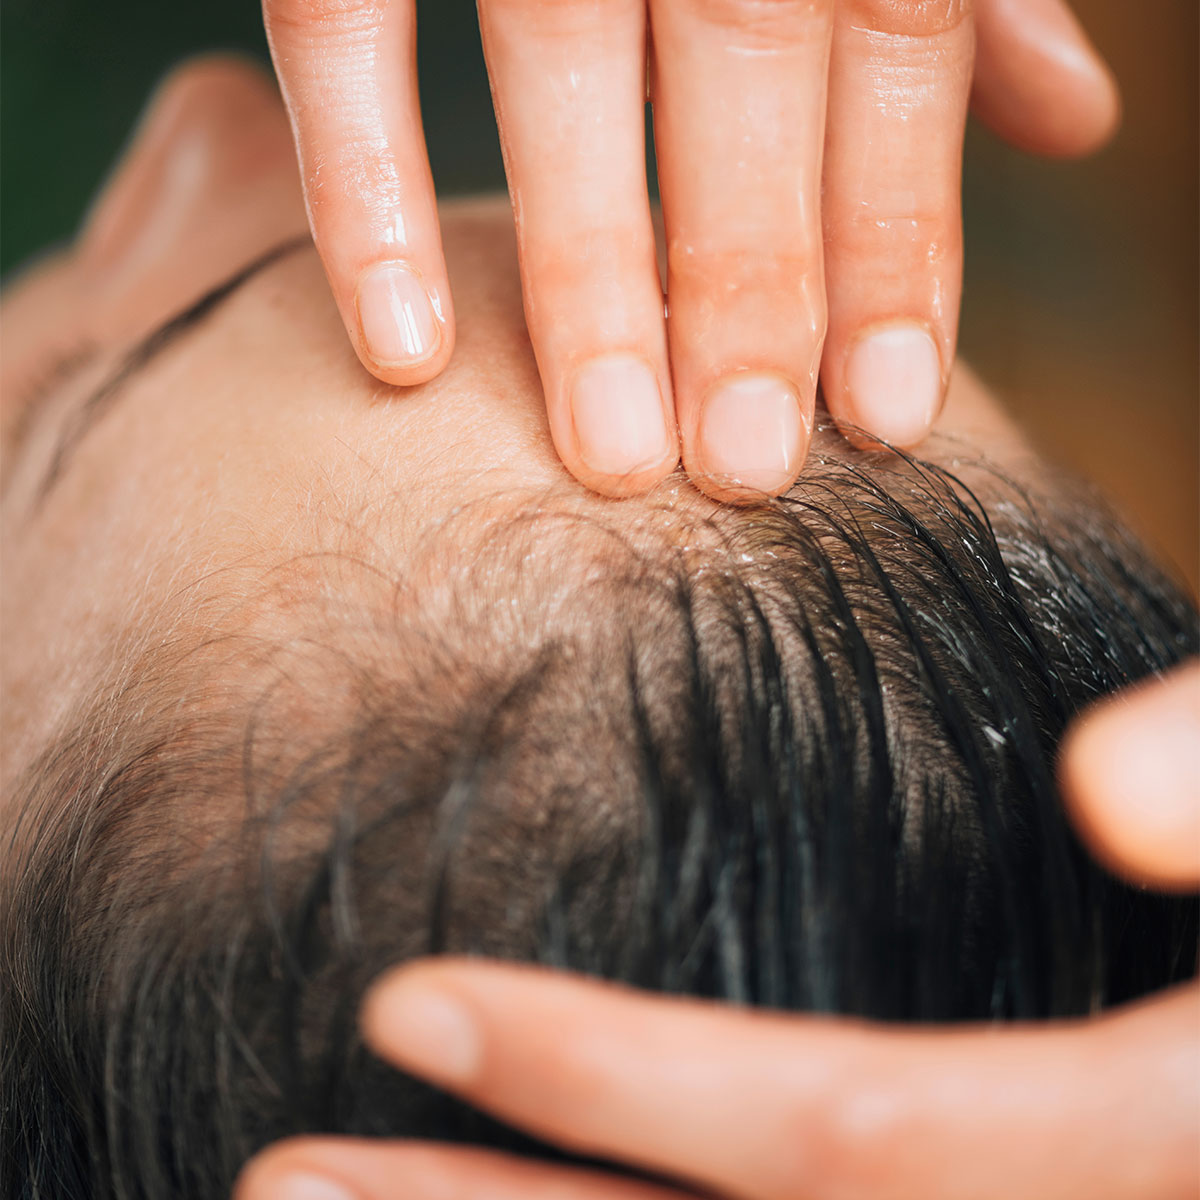 2 Scalp Oils Experts Swear By For Hair Loss